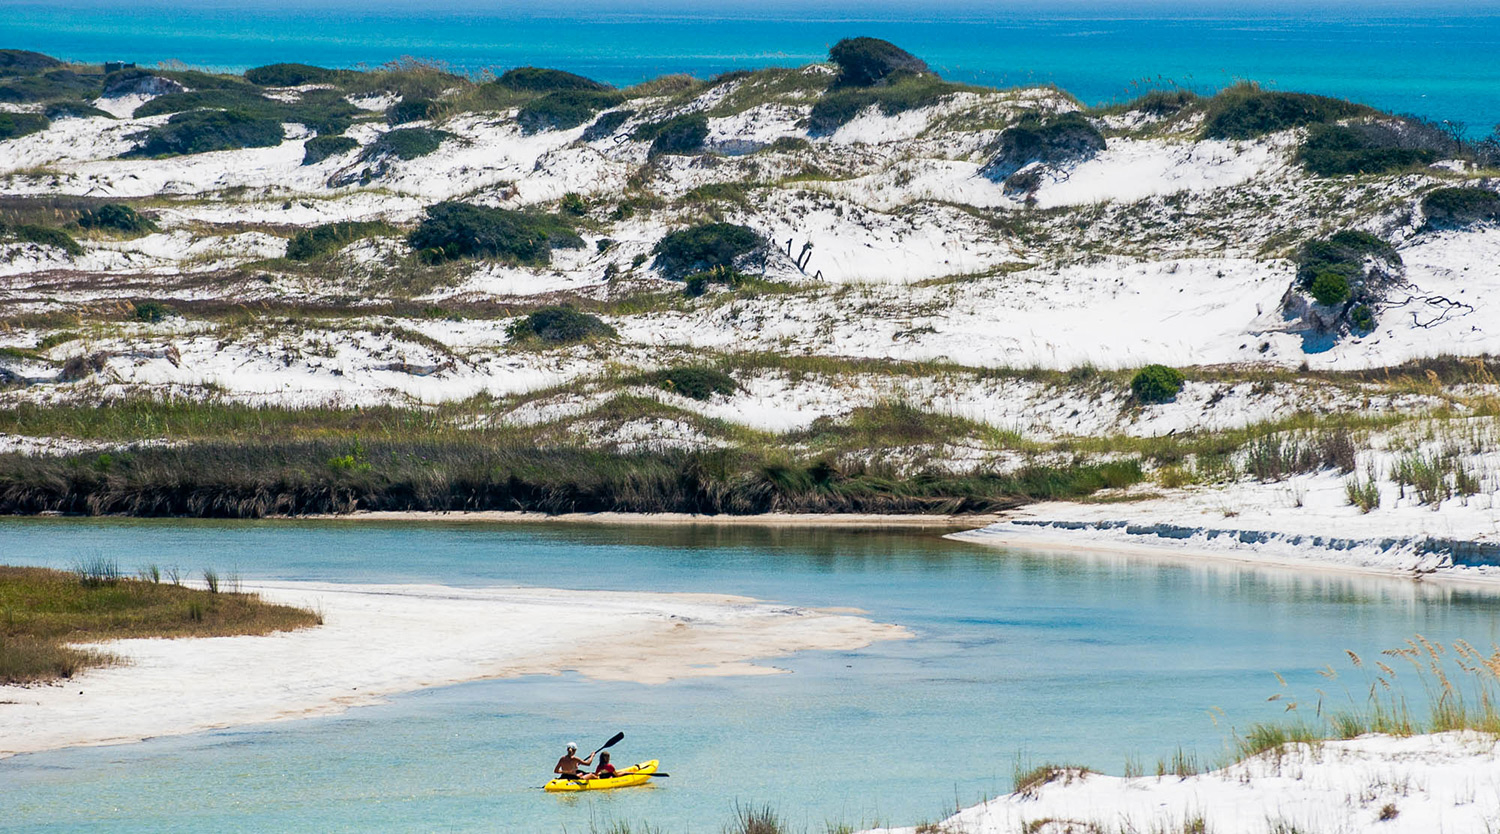 A couple enjoy paddling through the magnificence of Grayton Beach State Park.